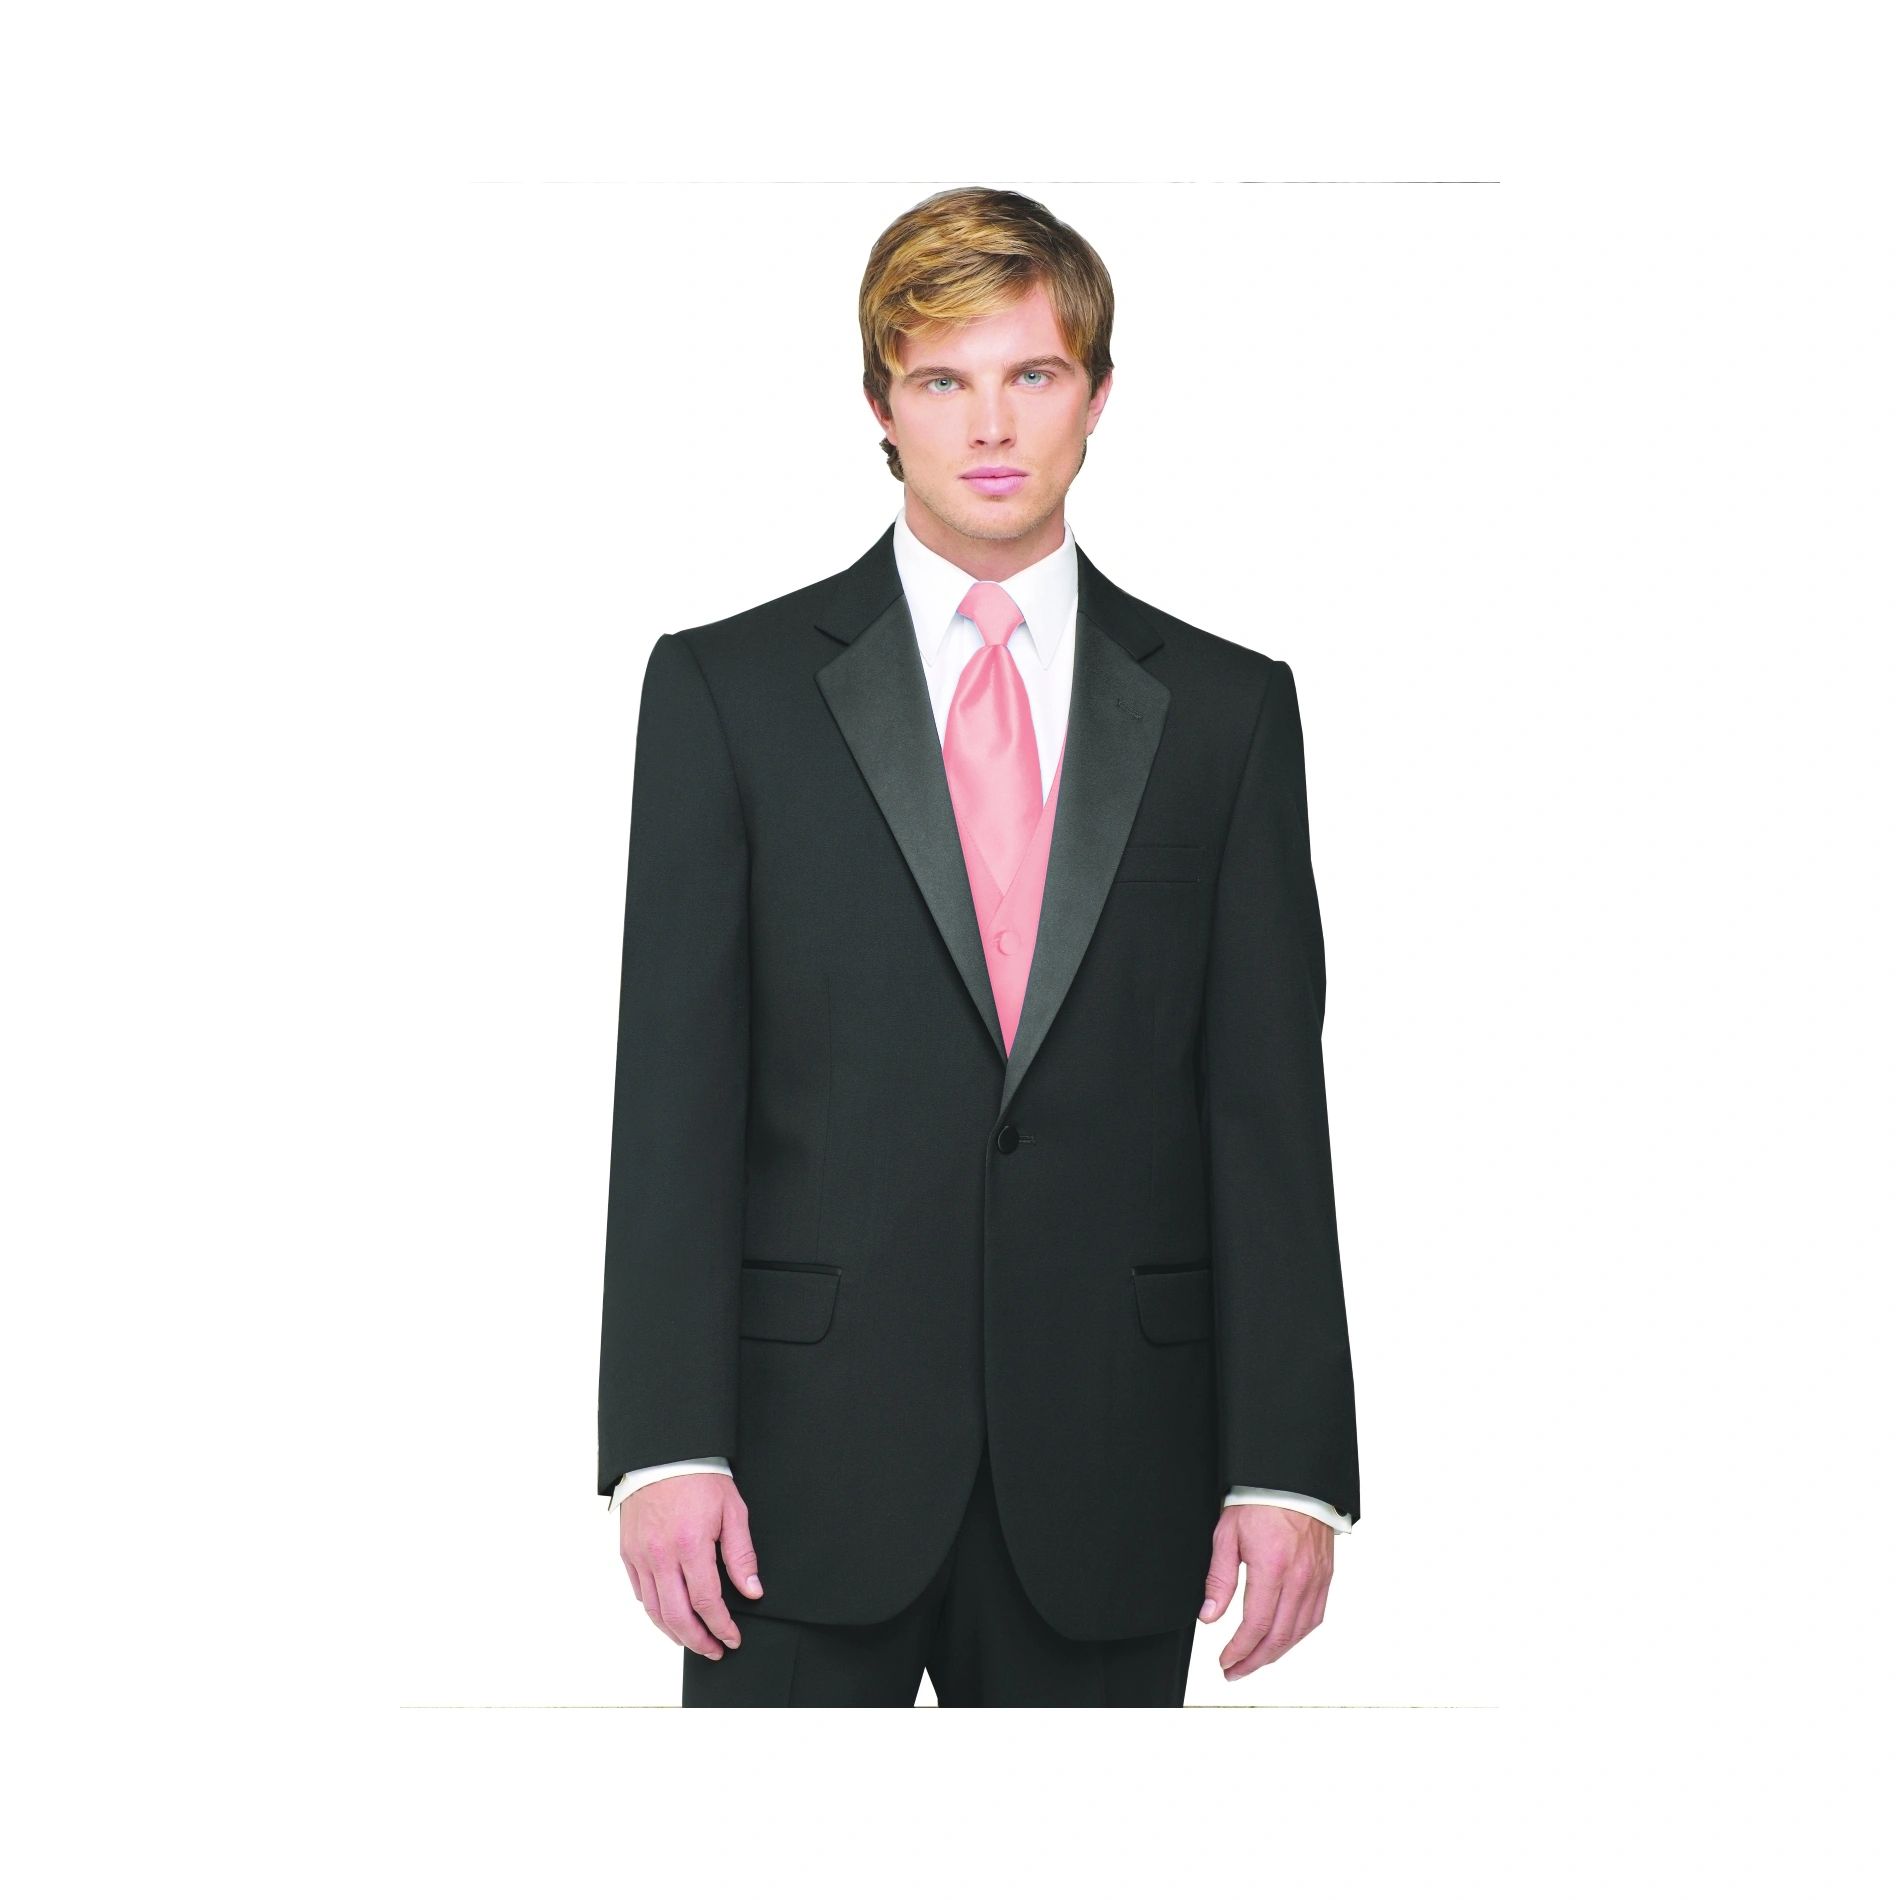 Neil Allyn 7-Piece Tuxedo with Flat Front Pants Pink Vest and Tie